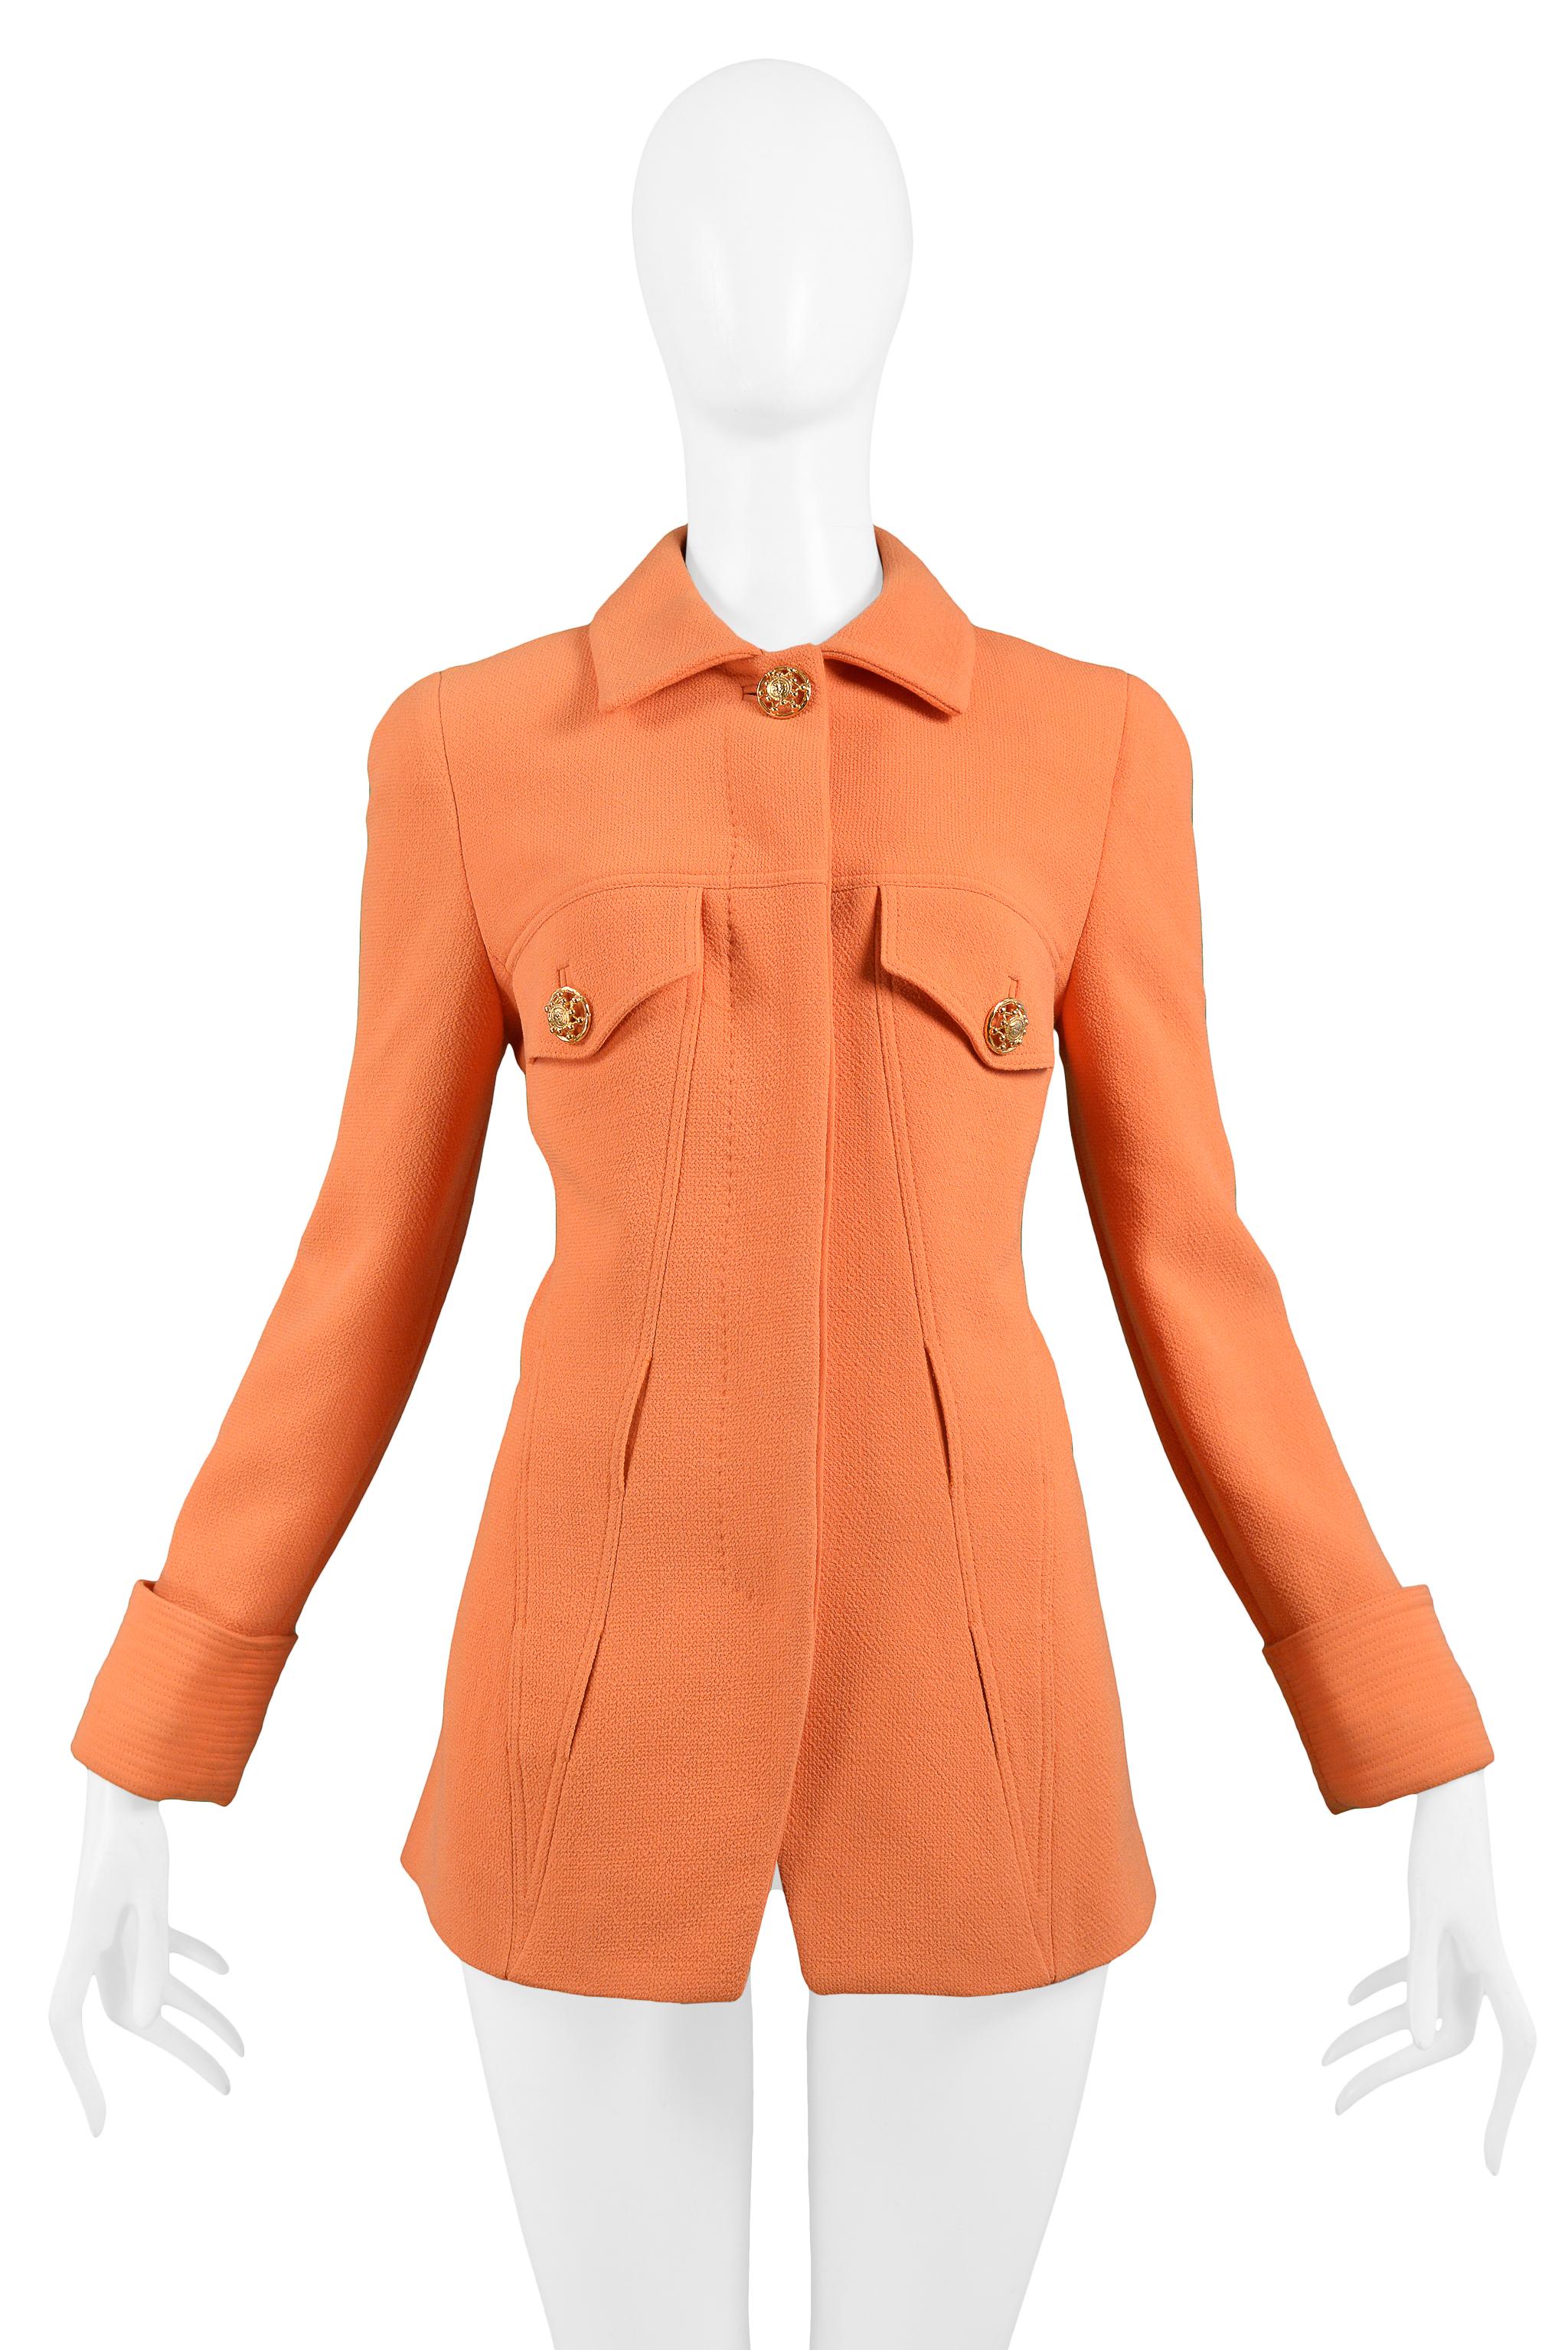 Vintage Gianni Versace coral orange wool blazer jacket with gold-tone Medusa buttons at breast pockets and collar. Features hidden-button closure at center front and double layer belt loops set into the front and back. Collection 1991.

Excellent